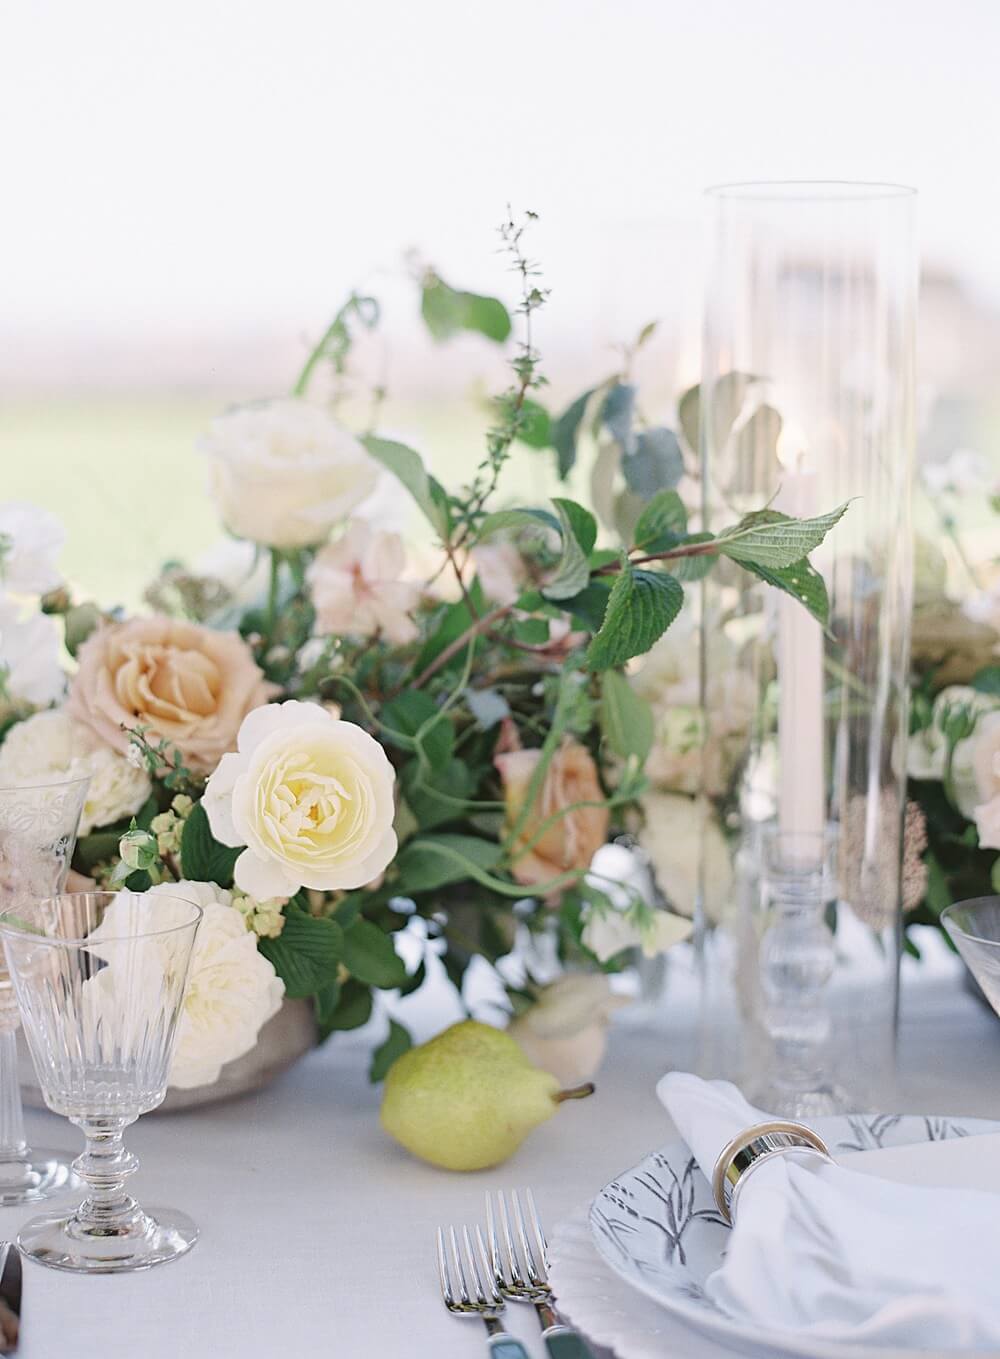 Peach and cream floral arrangement on tabletop with pear detail at cal-a-vie spa wedding - Jacqueline Benét Photography